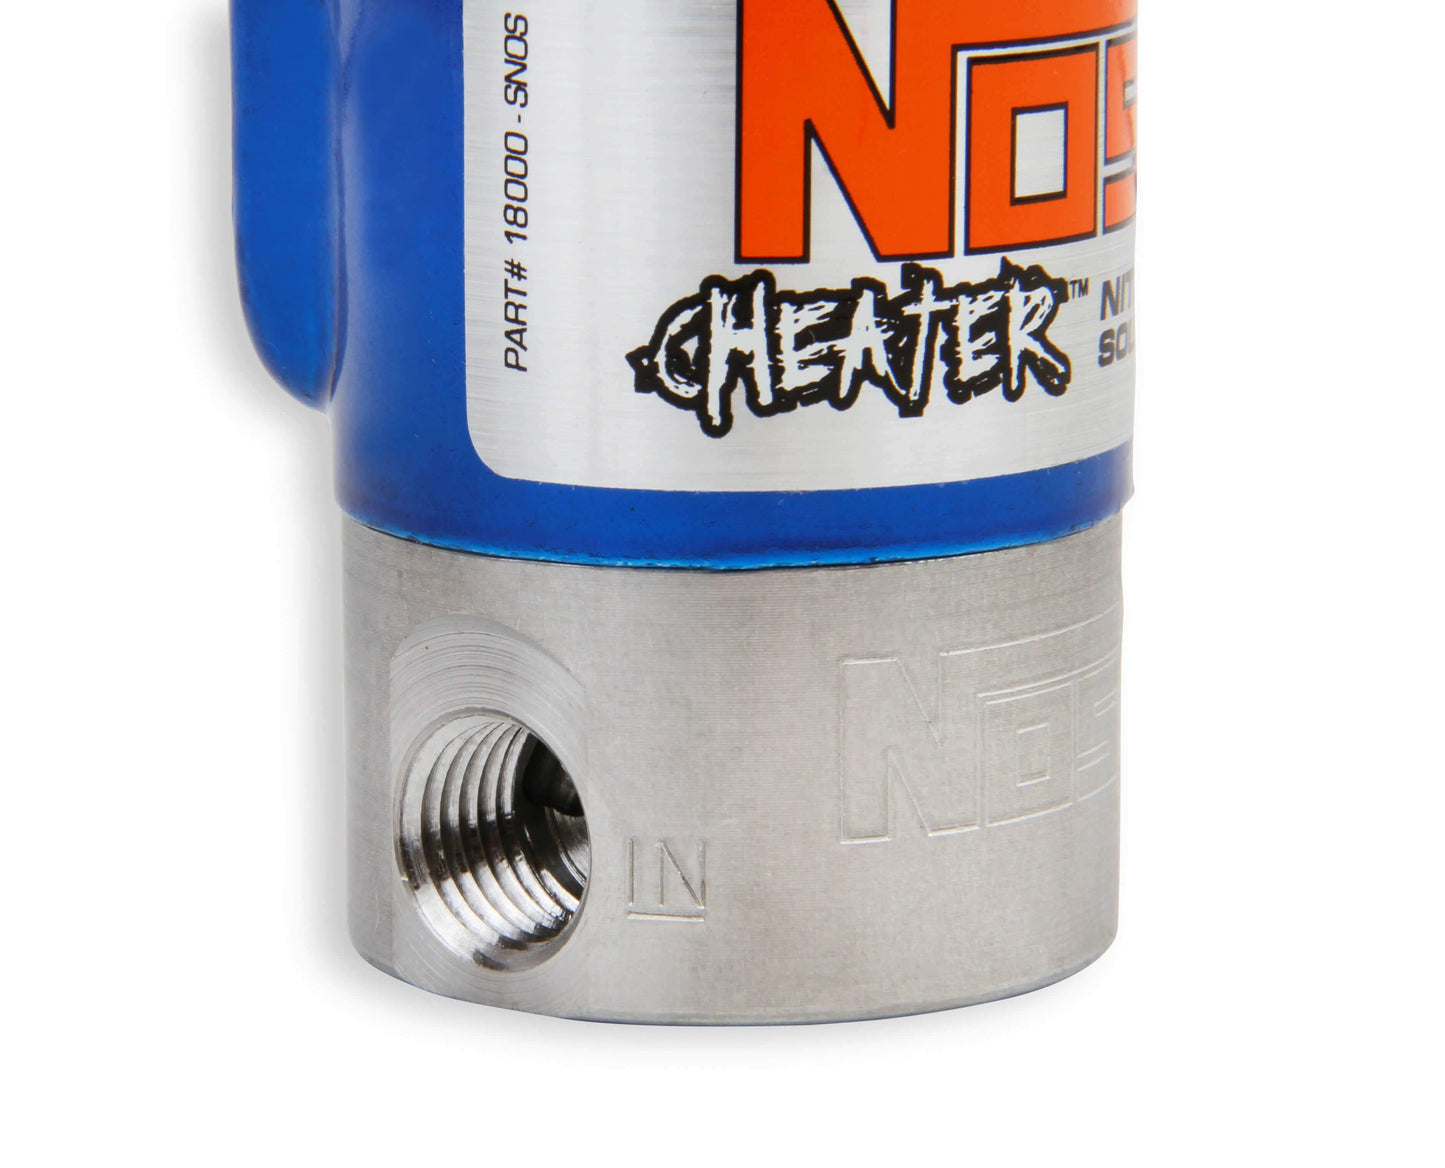 NOS 18000 Cheater Nitrous Solenoid Stainless Steel